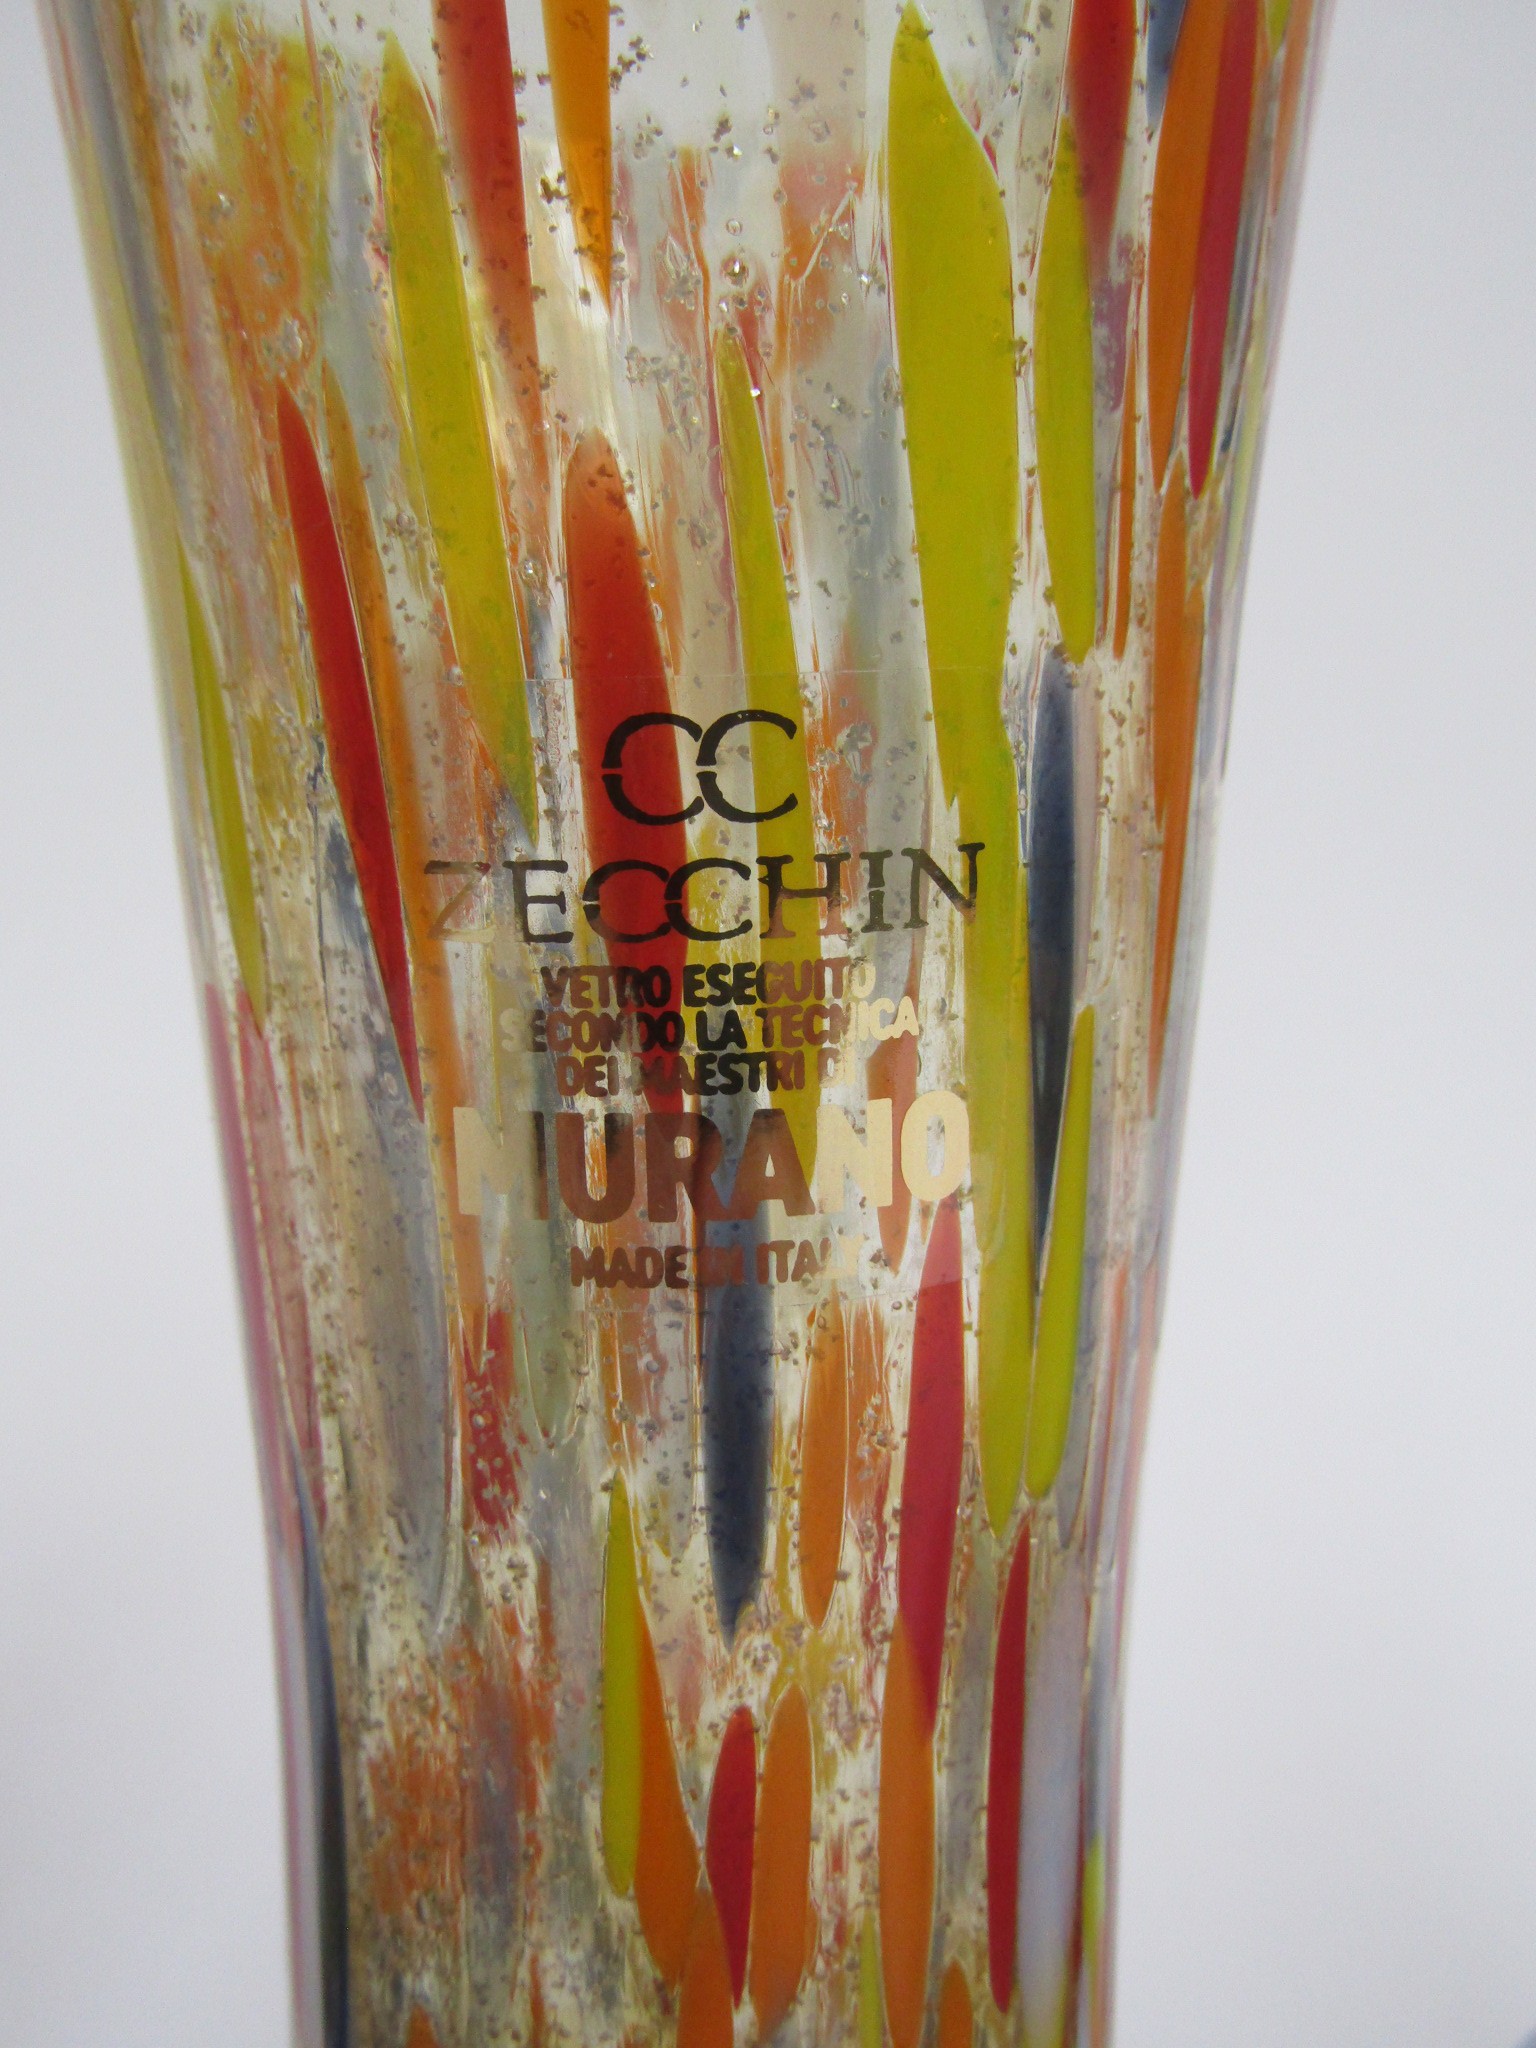 Three Italian glass vases with vertical coloured details. Label to single - CC Zecchin. Pair 20cm - Image 2 of 2